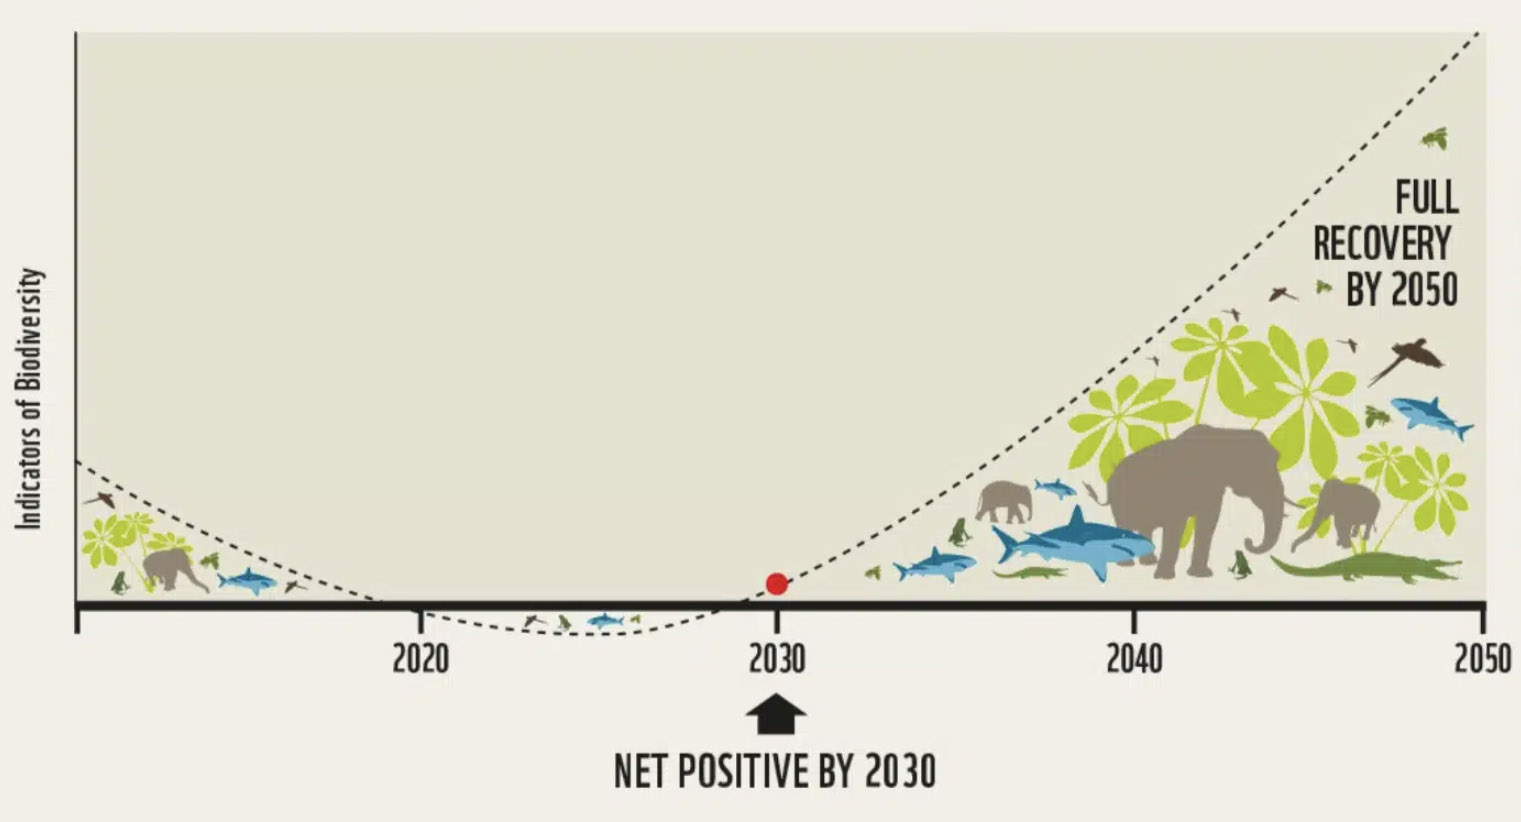 The mission of the Kunming-Montreal Global Biodiversity Framework is to rapidly bend the curve on ecosystem degradation and biodiversity loss, achieving a “nature positive” world by 2030 with a full recovery by 2050. Courtesy of the Nature Positive Initiative https://www.naturepositive.org/, 2022.